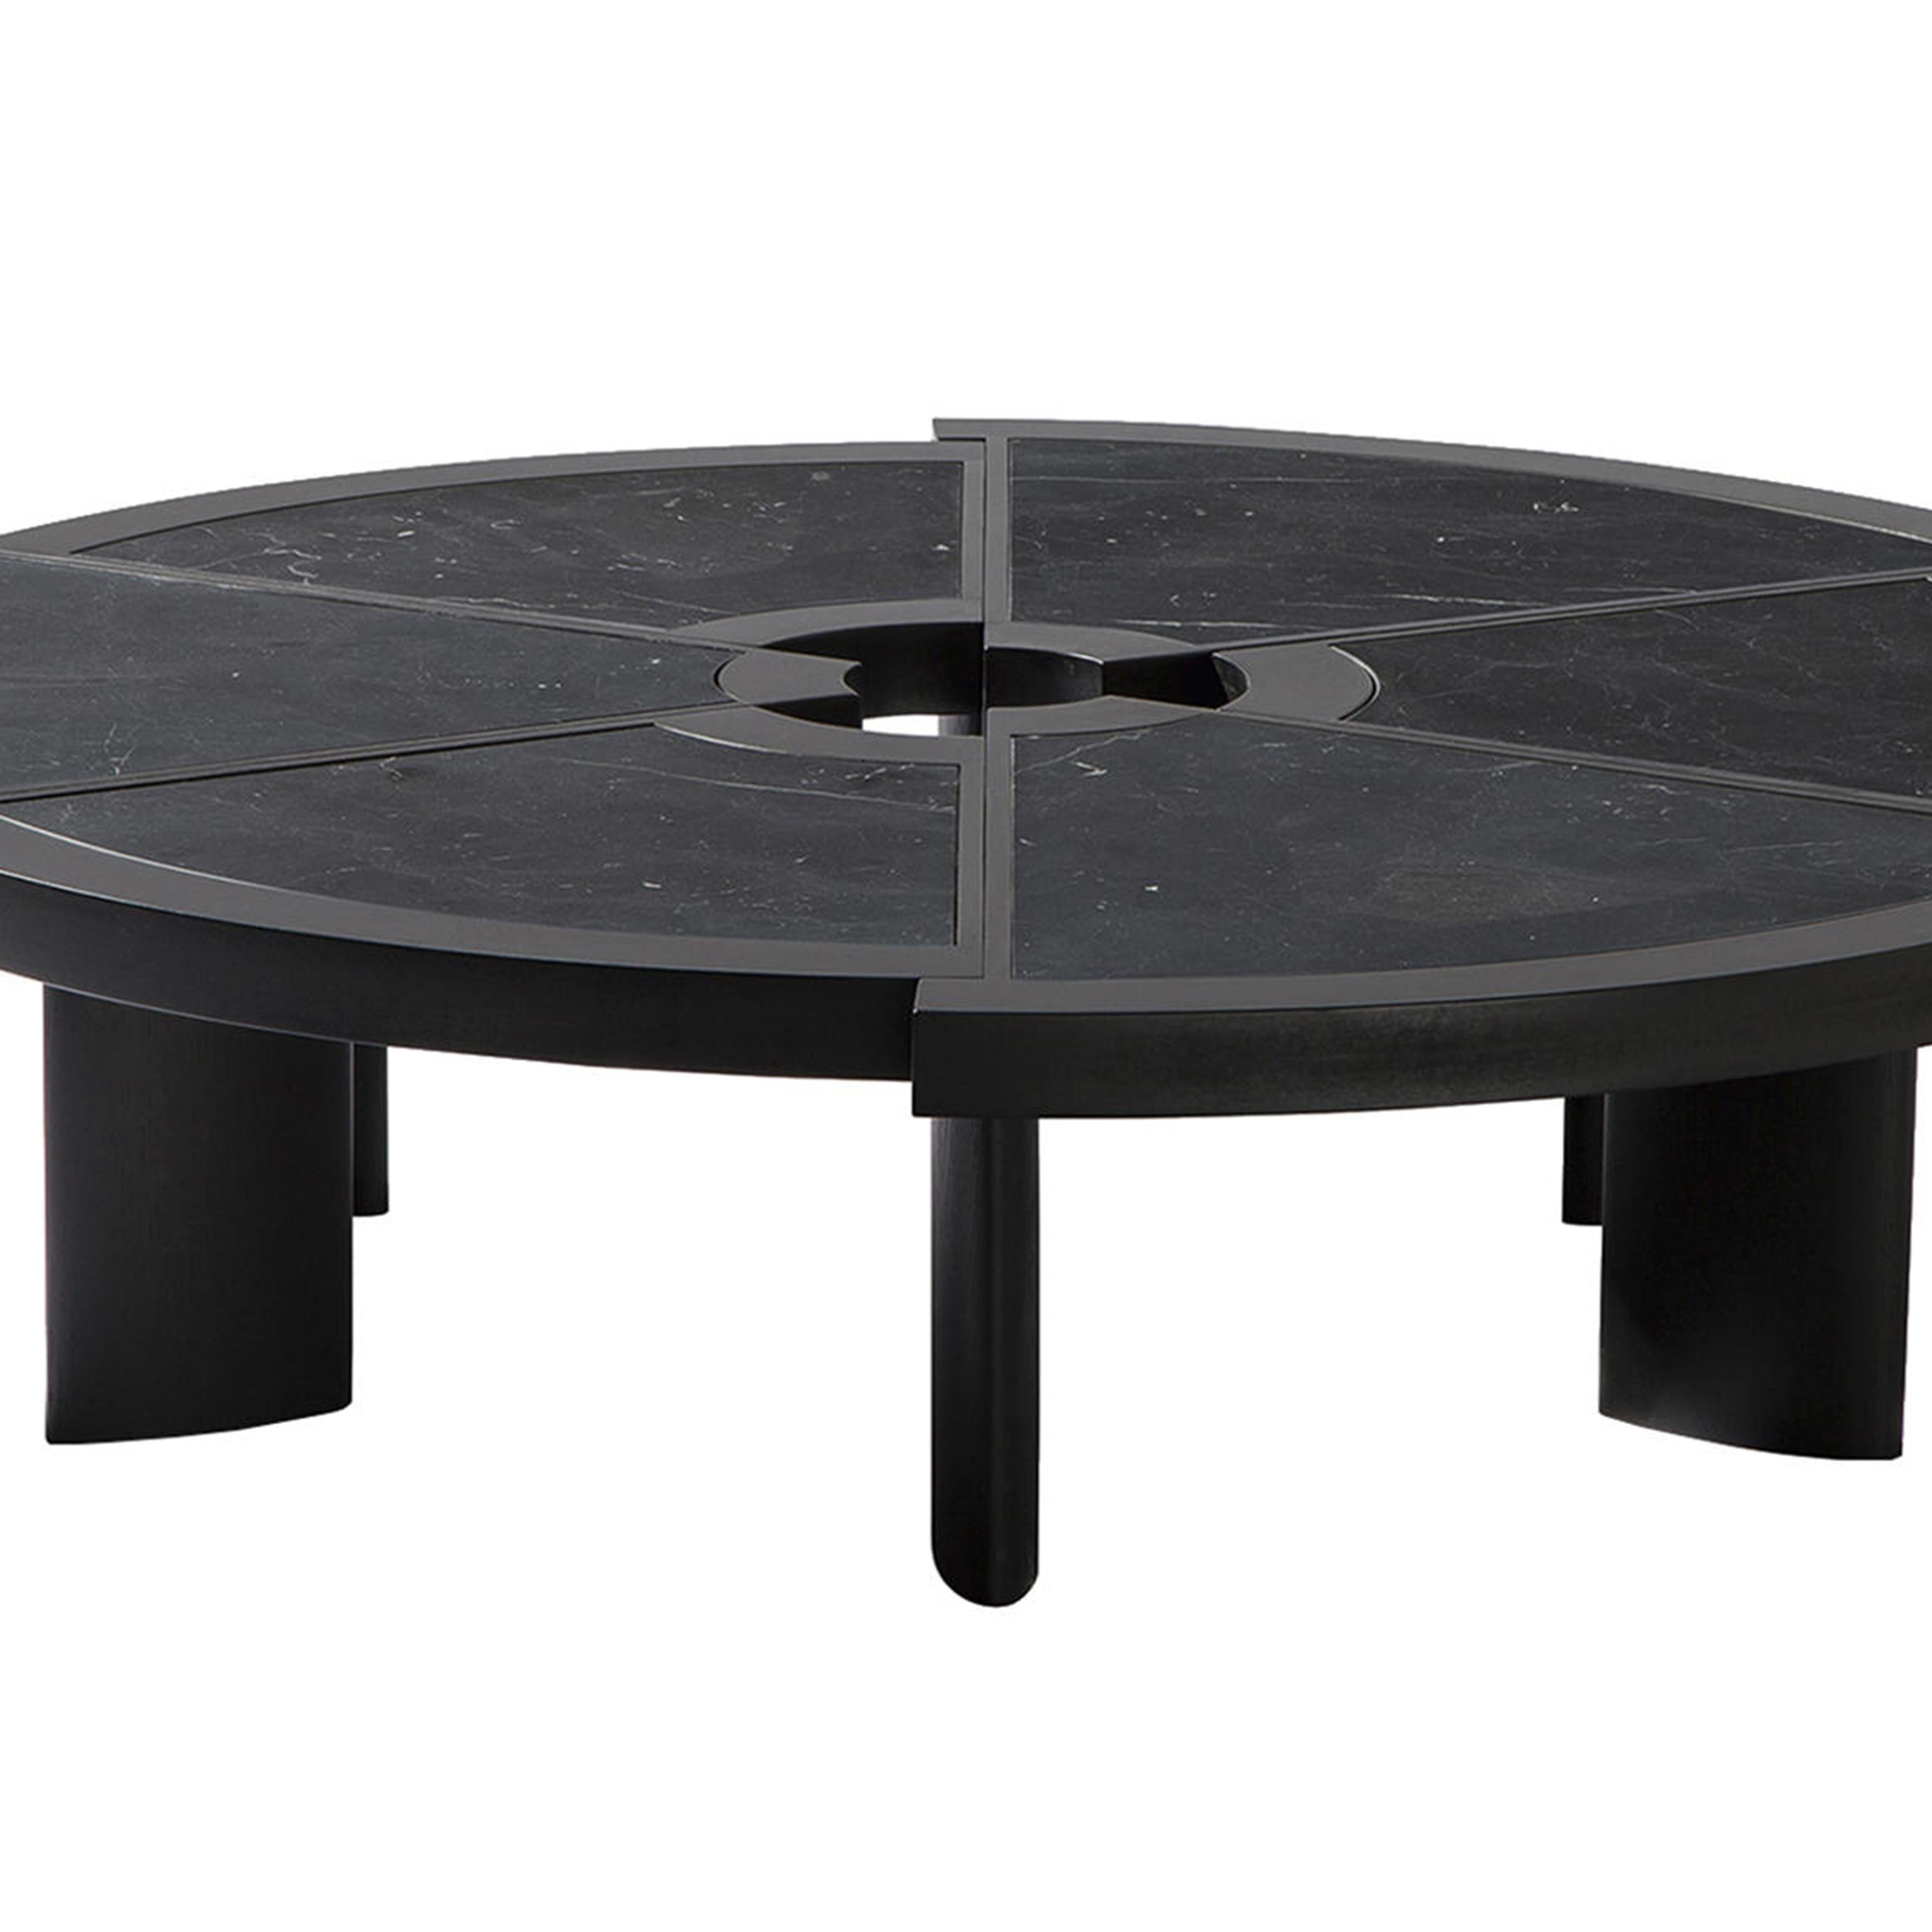 Mid-Century Modern Charlotte Perriand Rio Table for Cassina: a Timeless Design Masterpiece For Sale